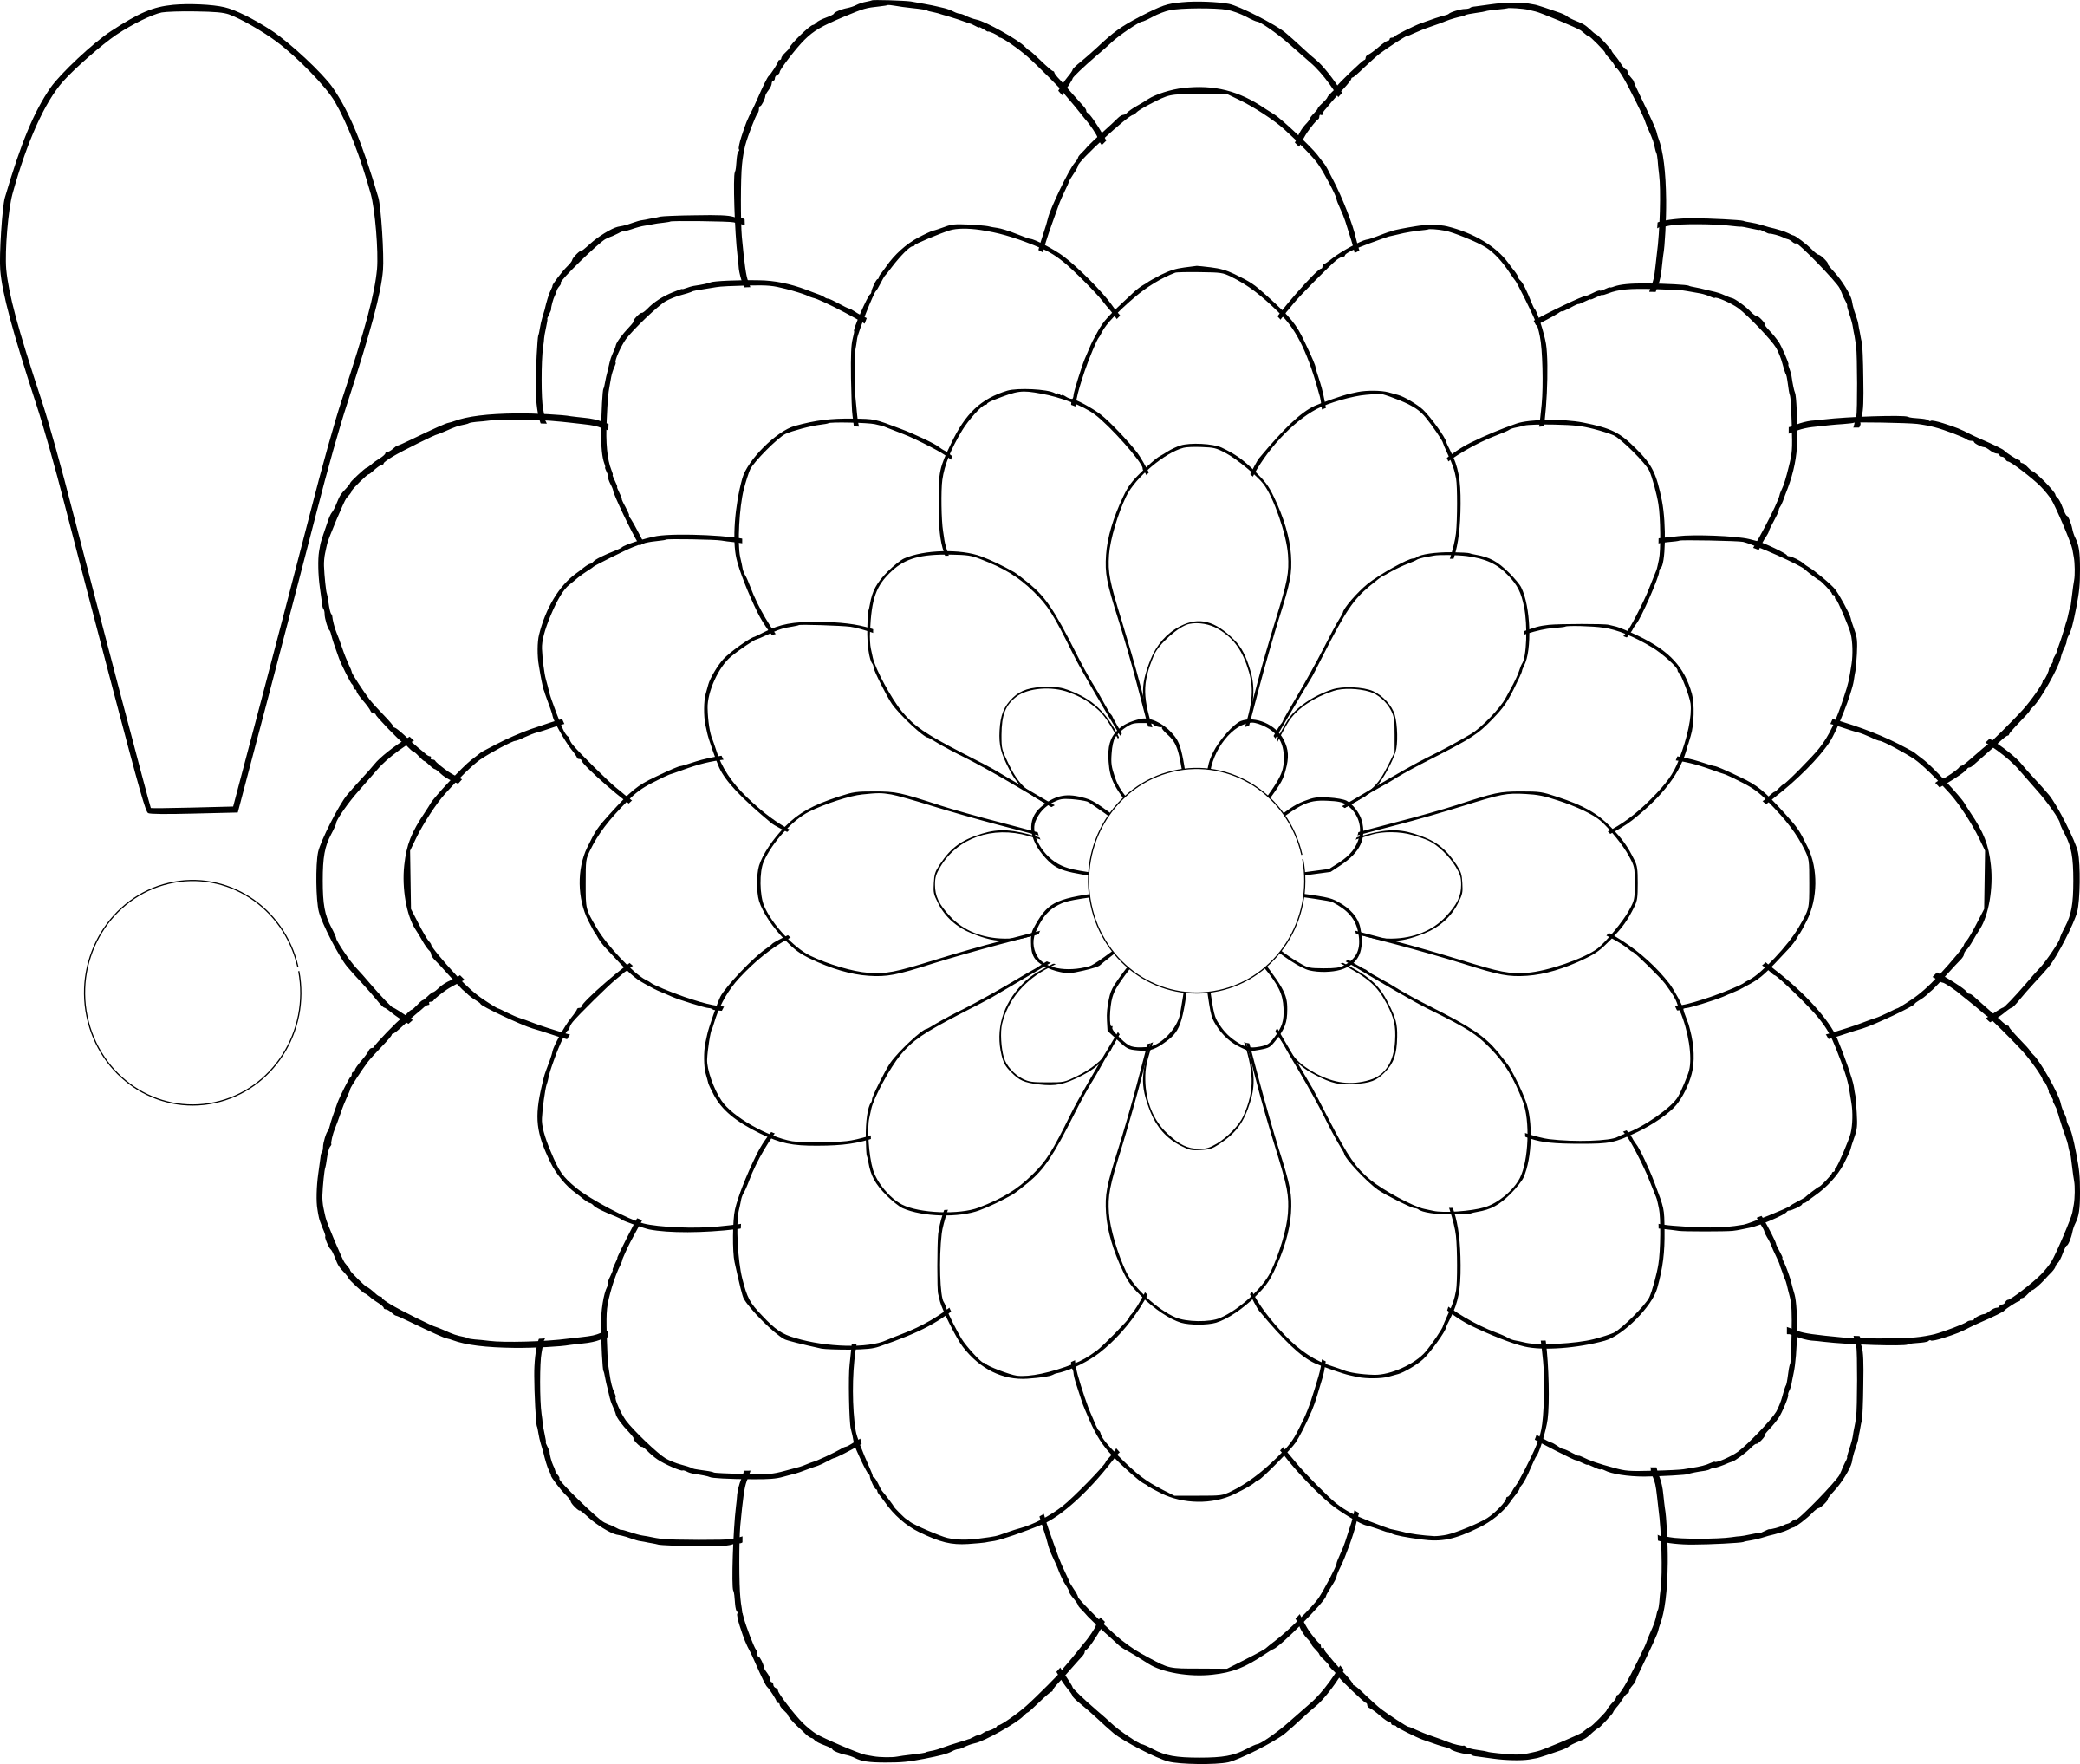 Free flower 6 large petals coloring pages